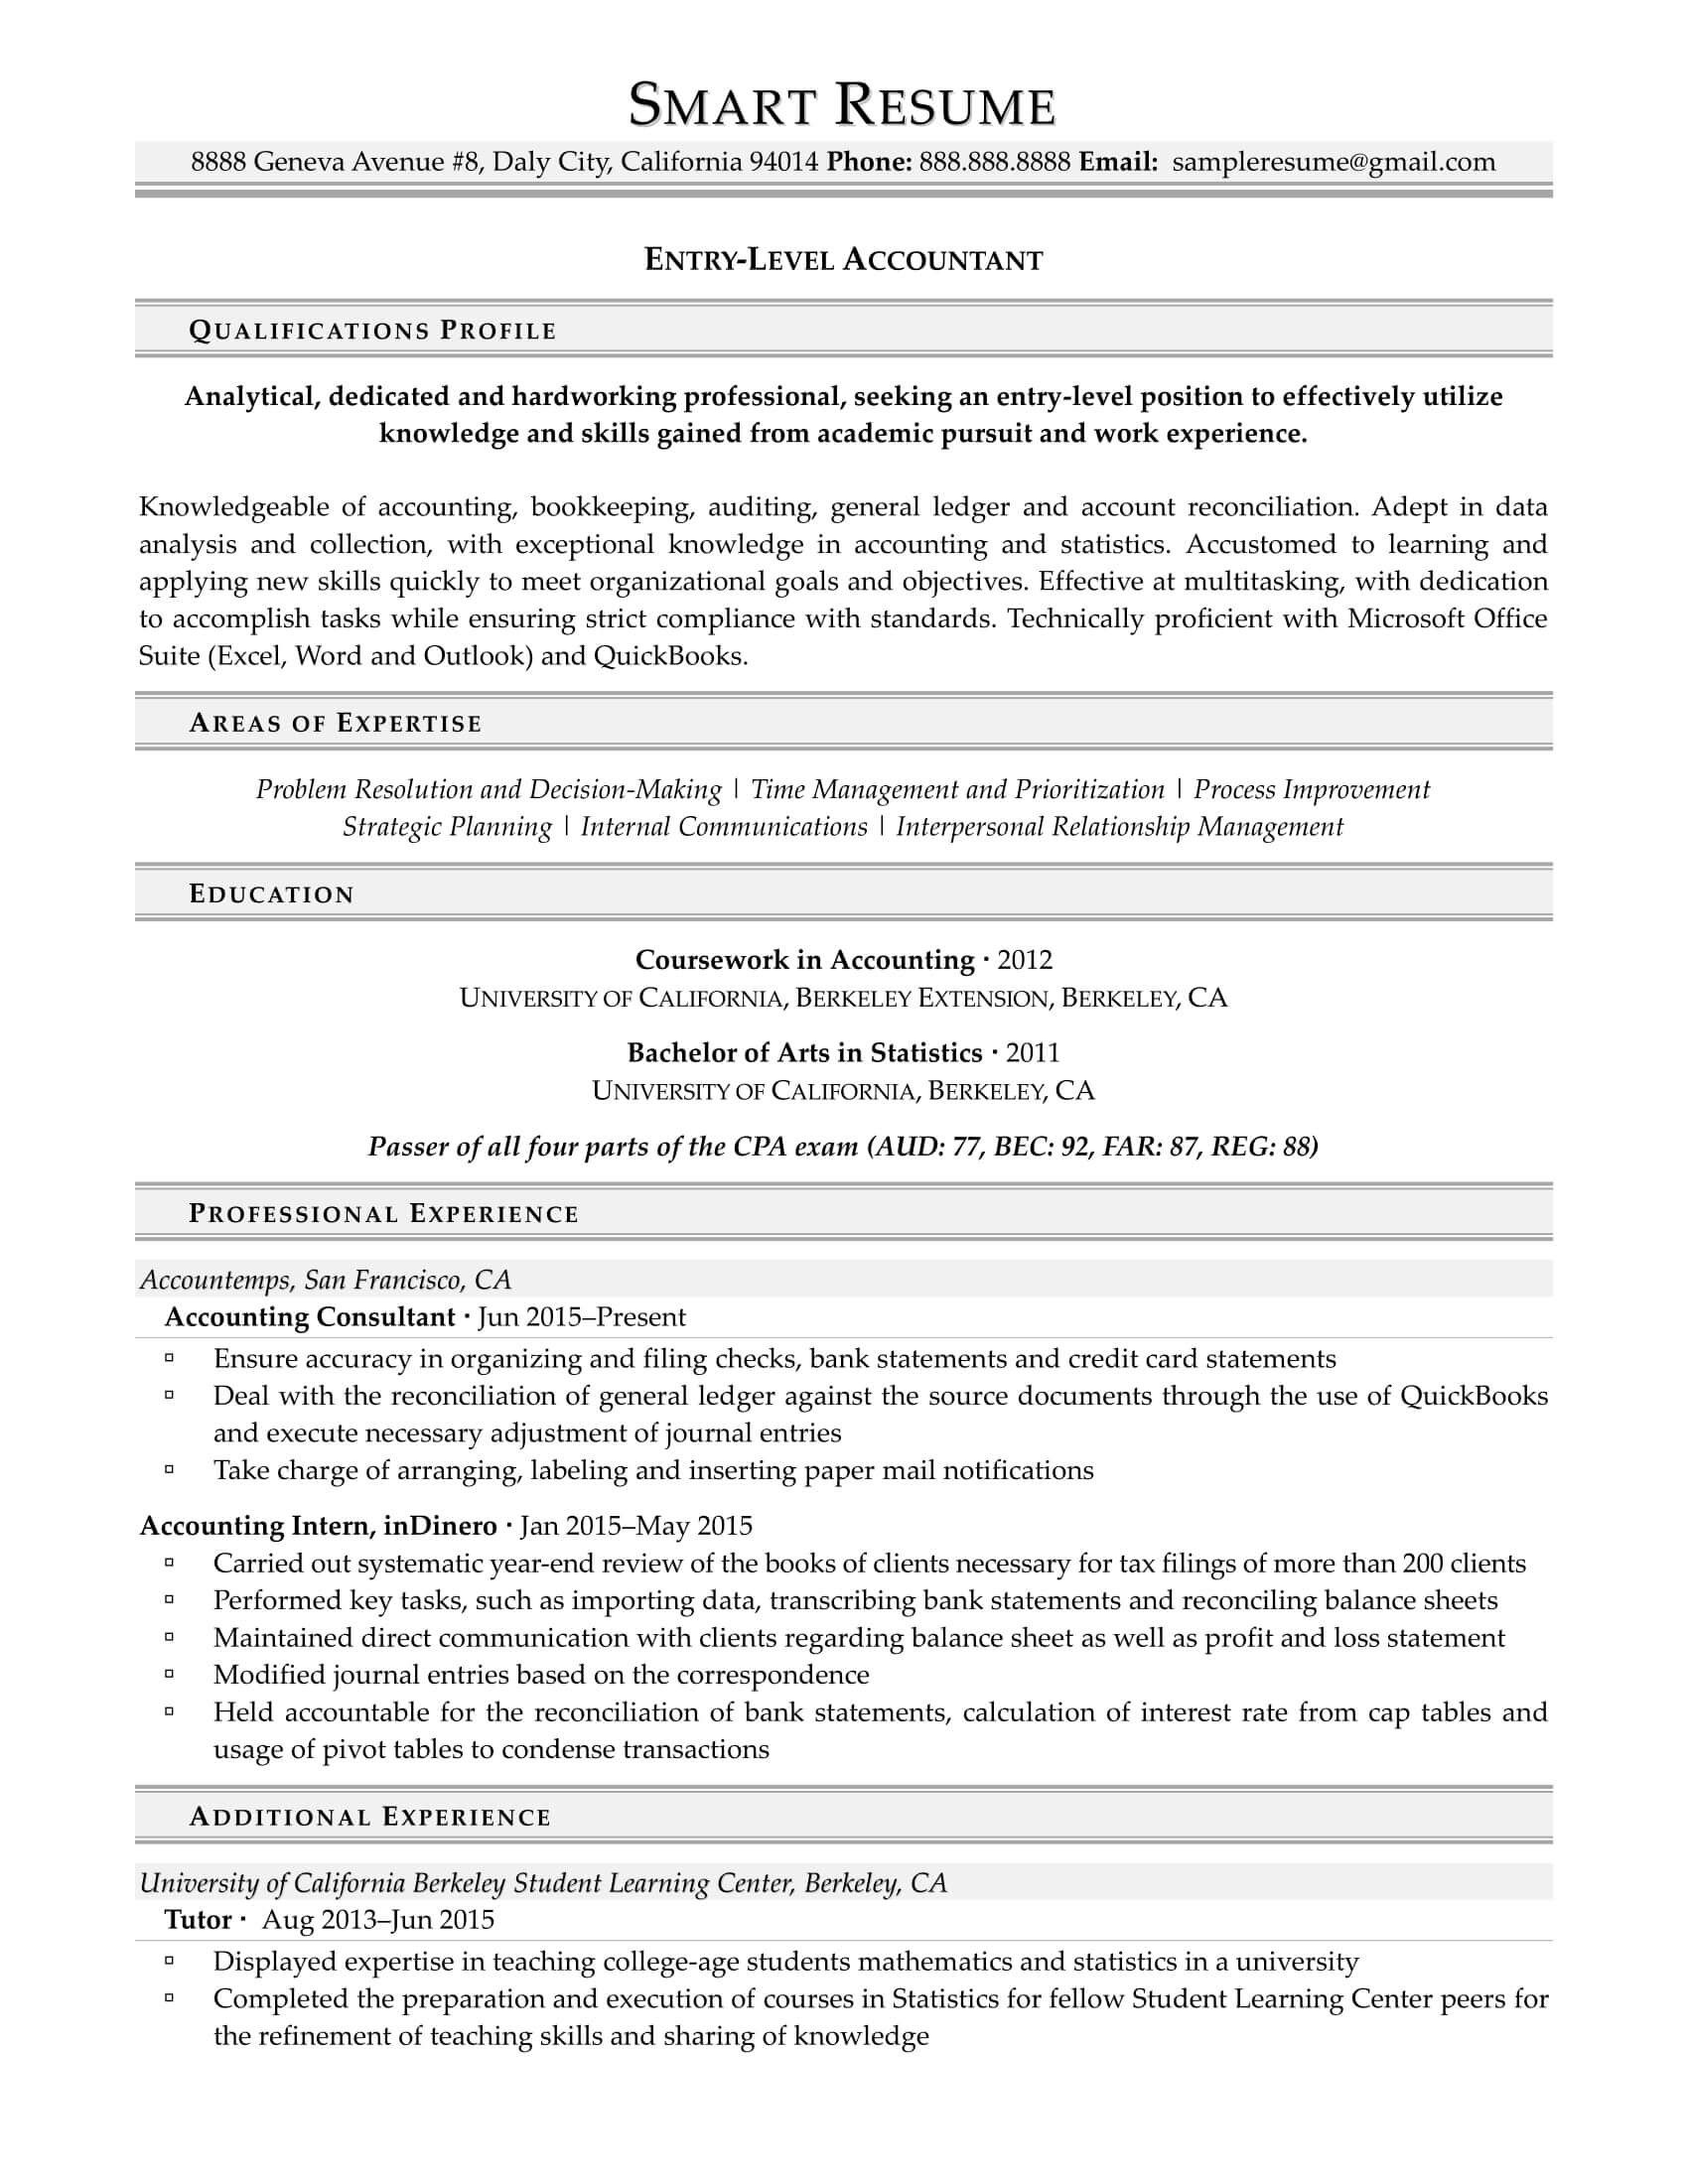 Sample Resume for Cpa Board Passer Resume Examples Smart Resume Services